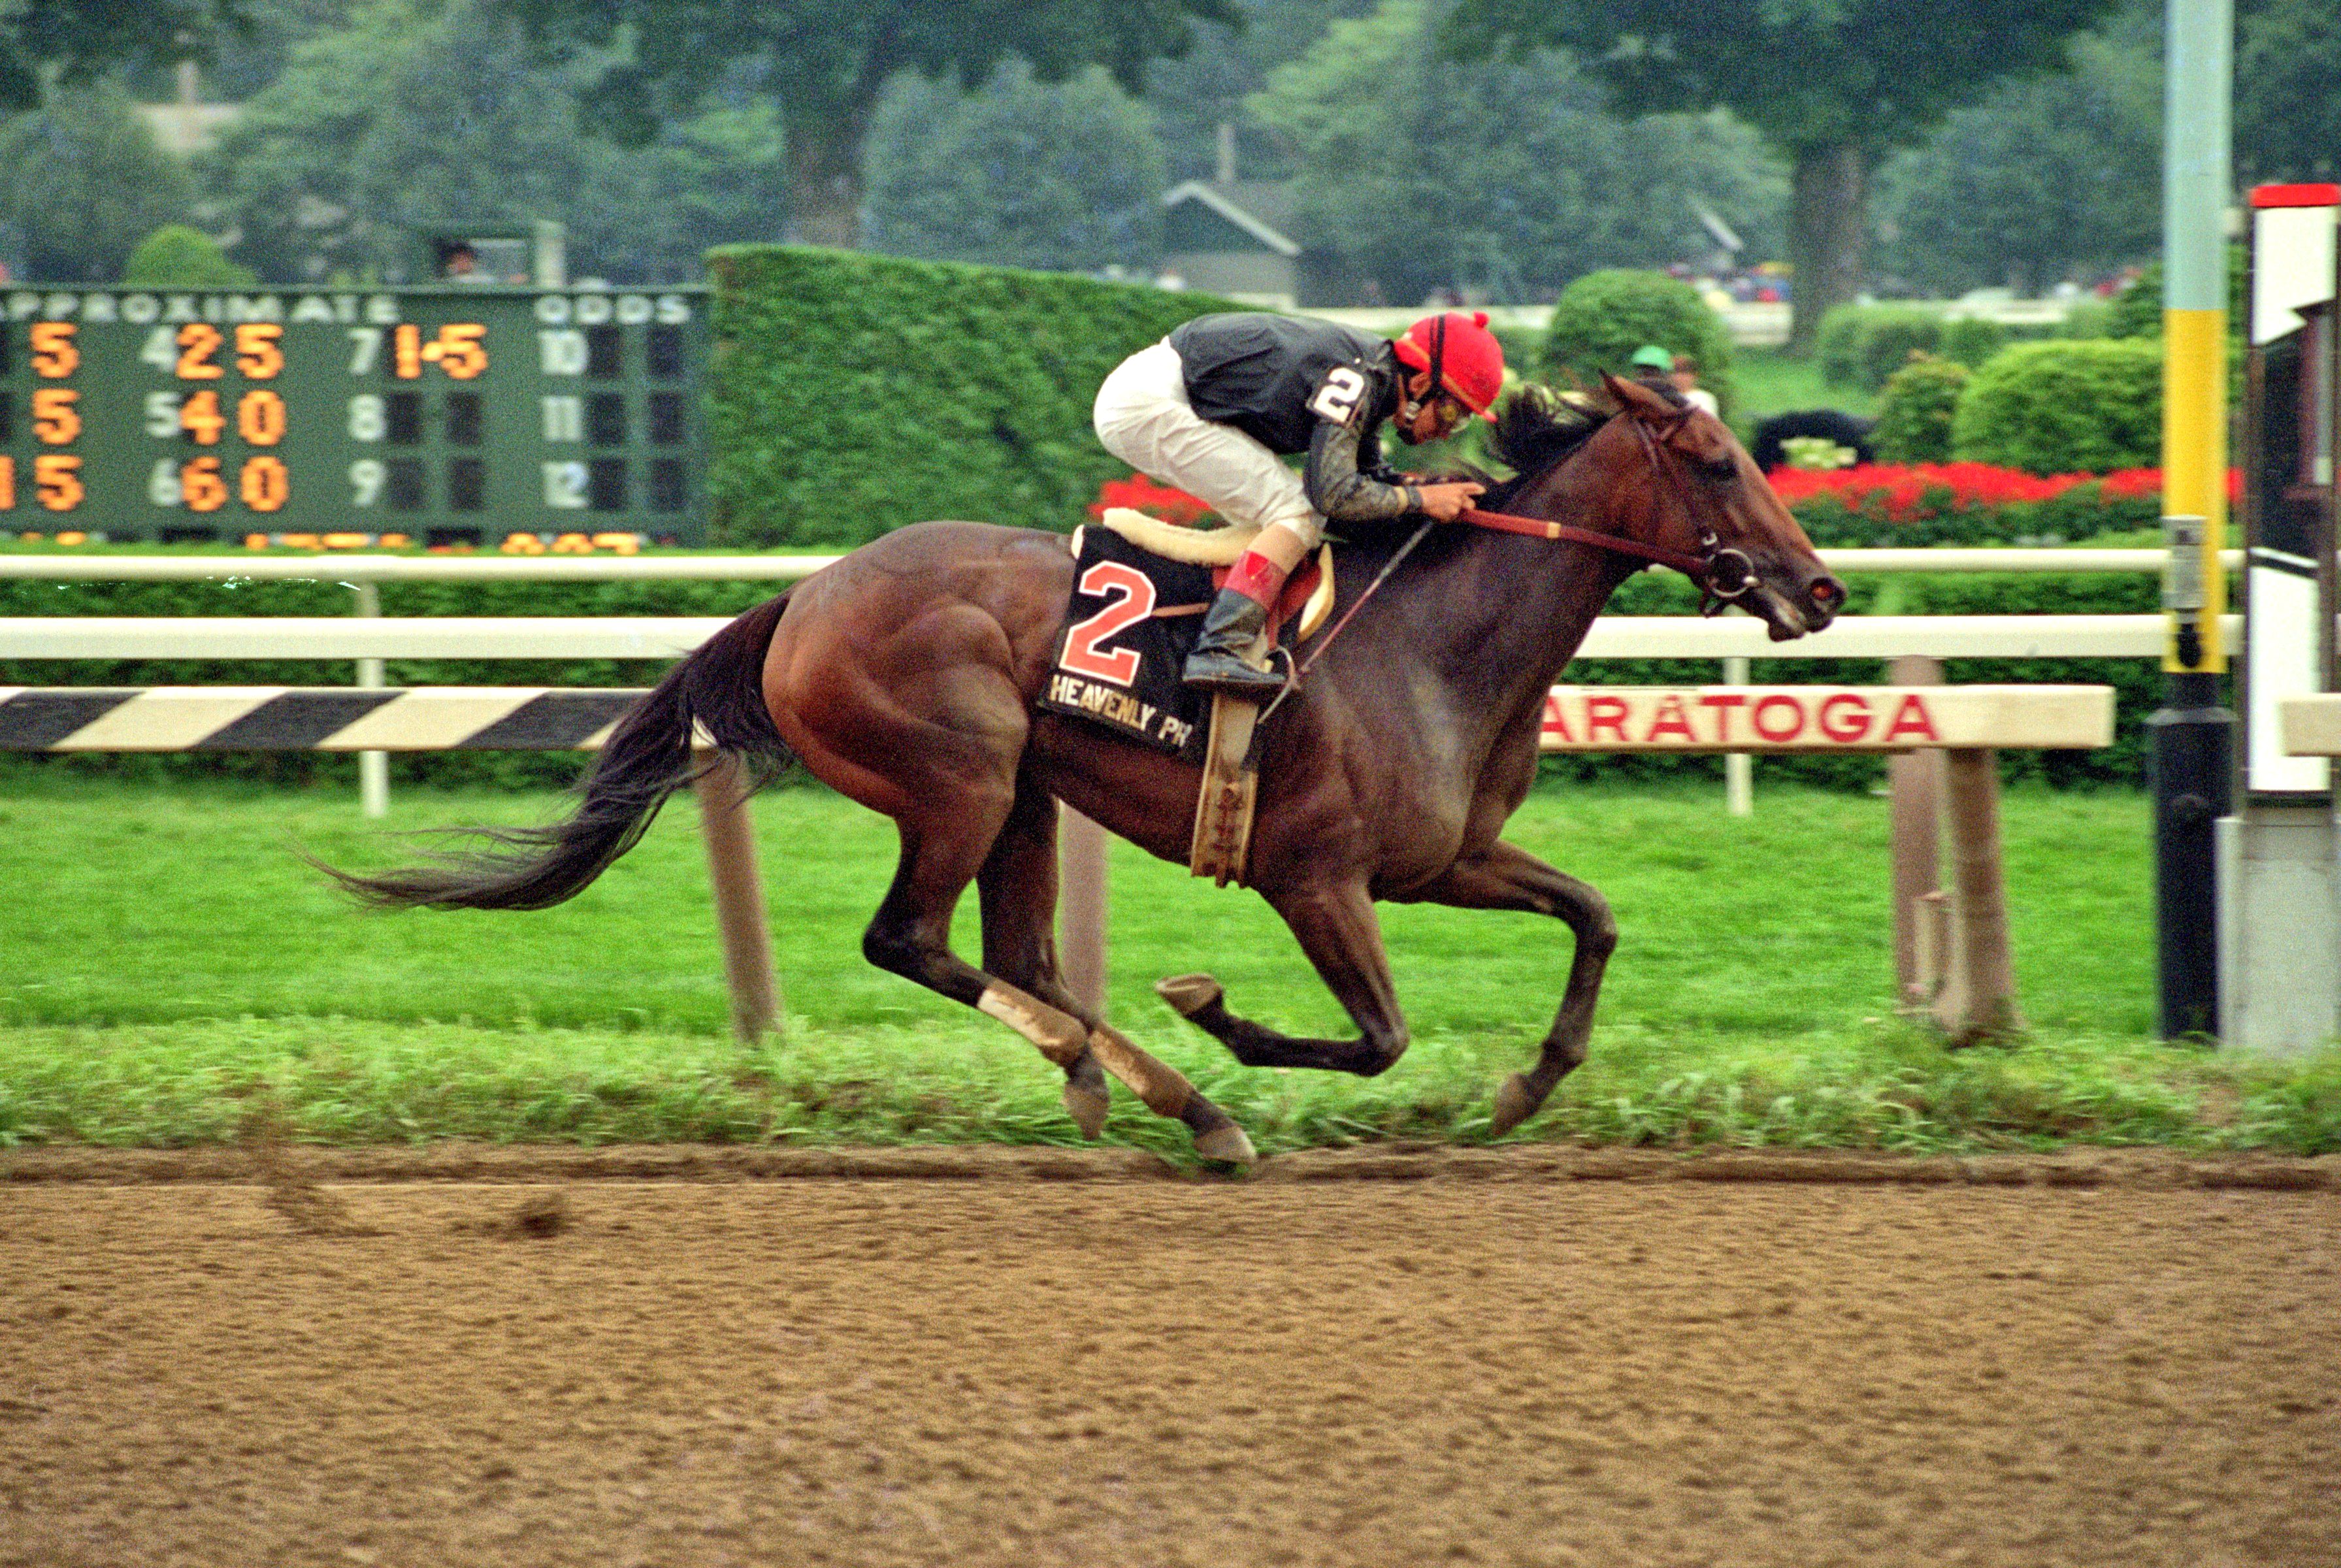 Heavenly Prize, Mike Smith up, winning 1994 Alabama Stakes at Saratoga (NYRA)